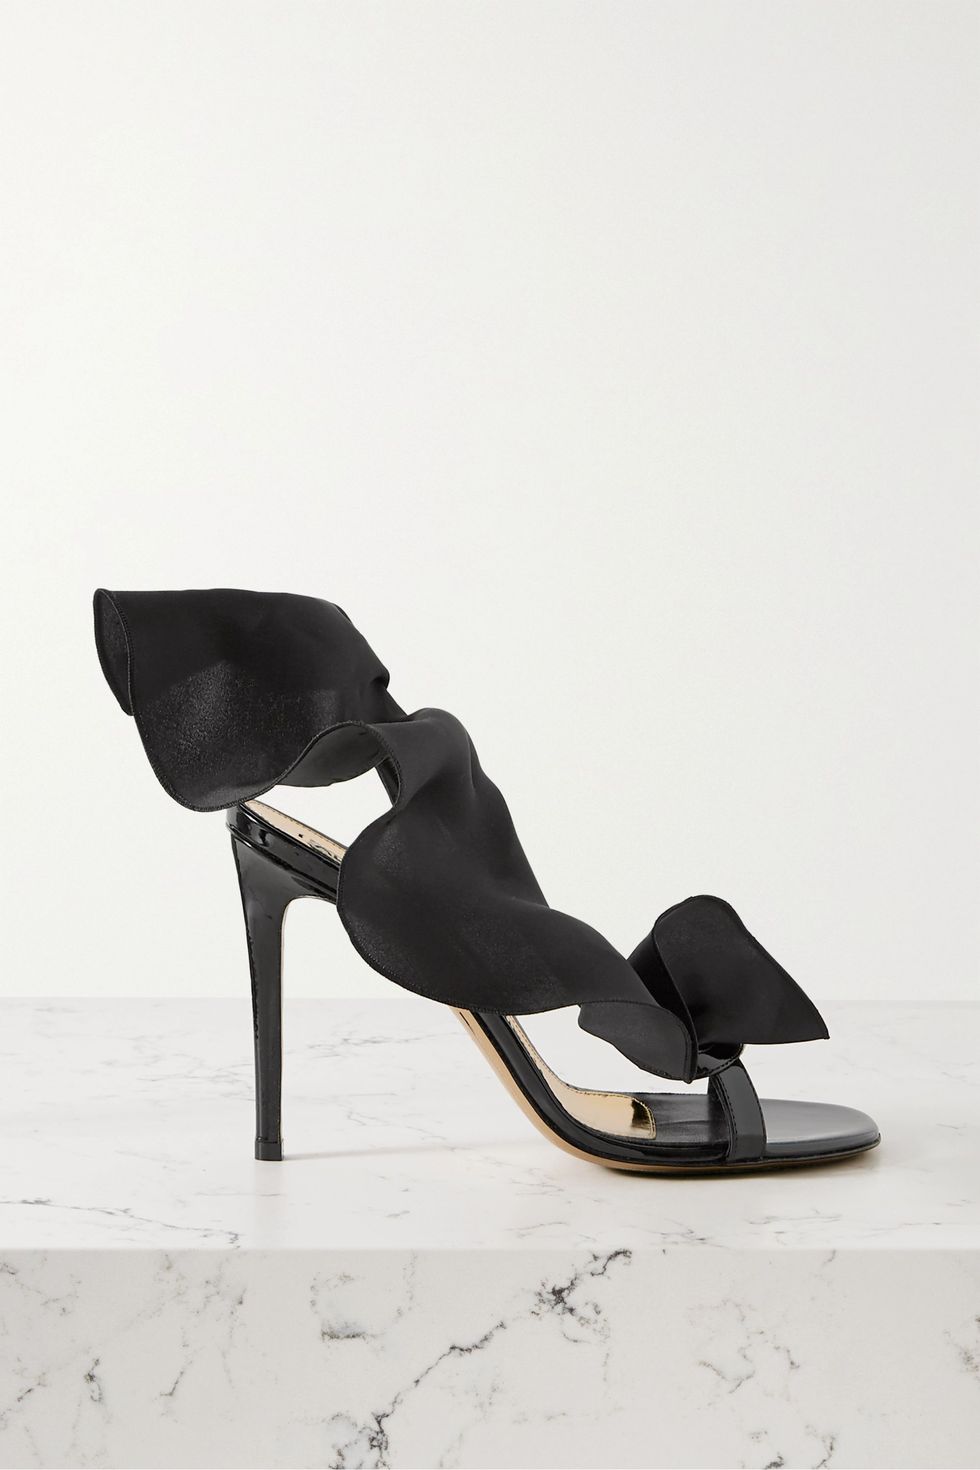 Penelope ruffled organza and patent leather slingback sandals